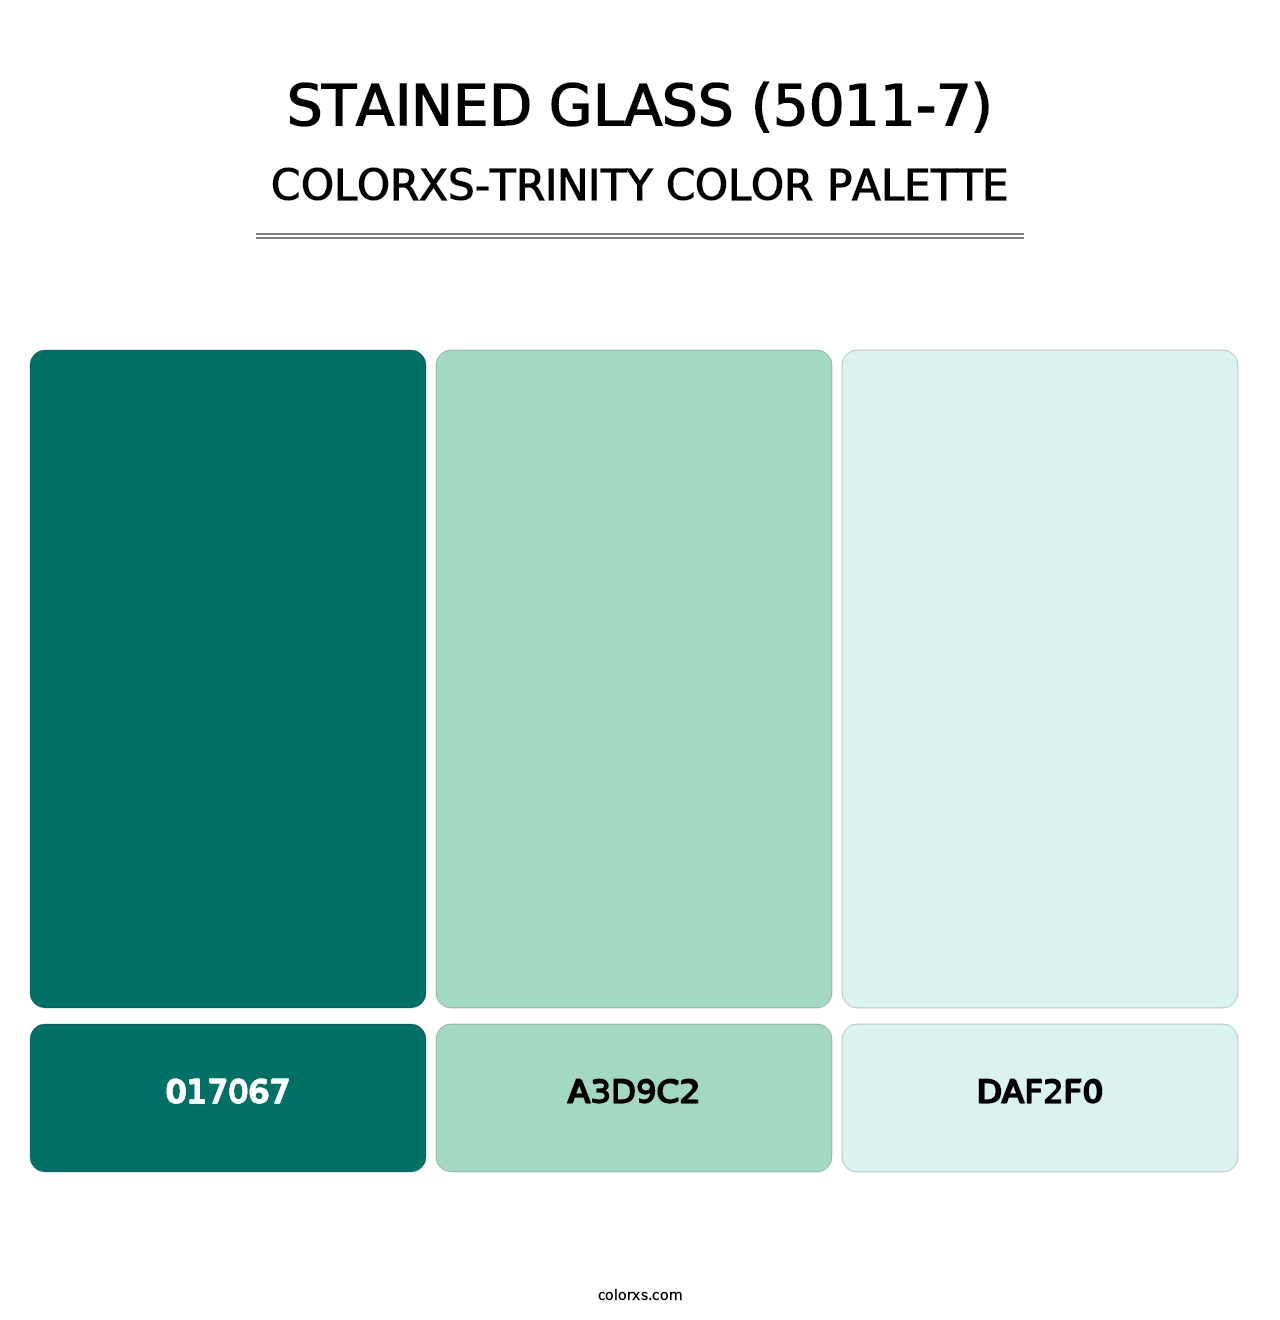 Stained Glass (5011-7) - Colorxs Trinity Palette